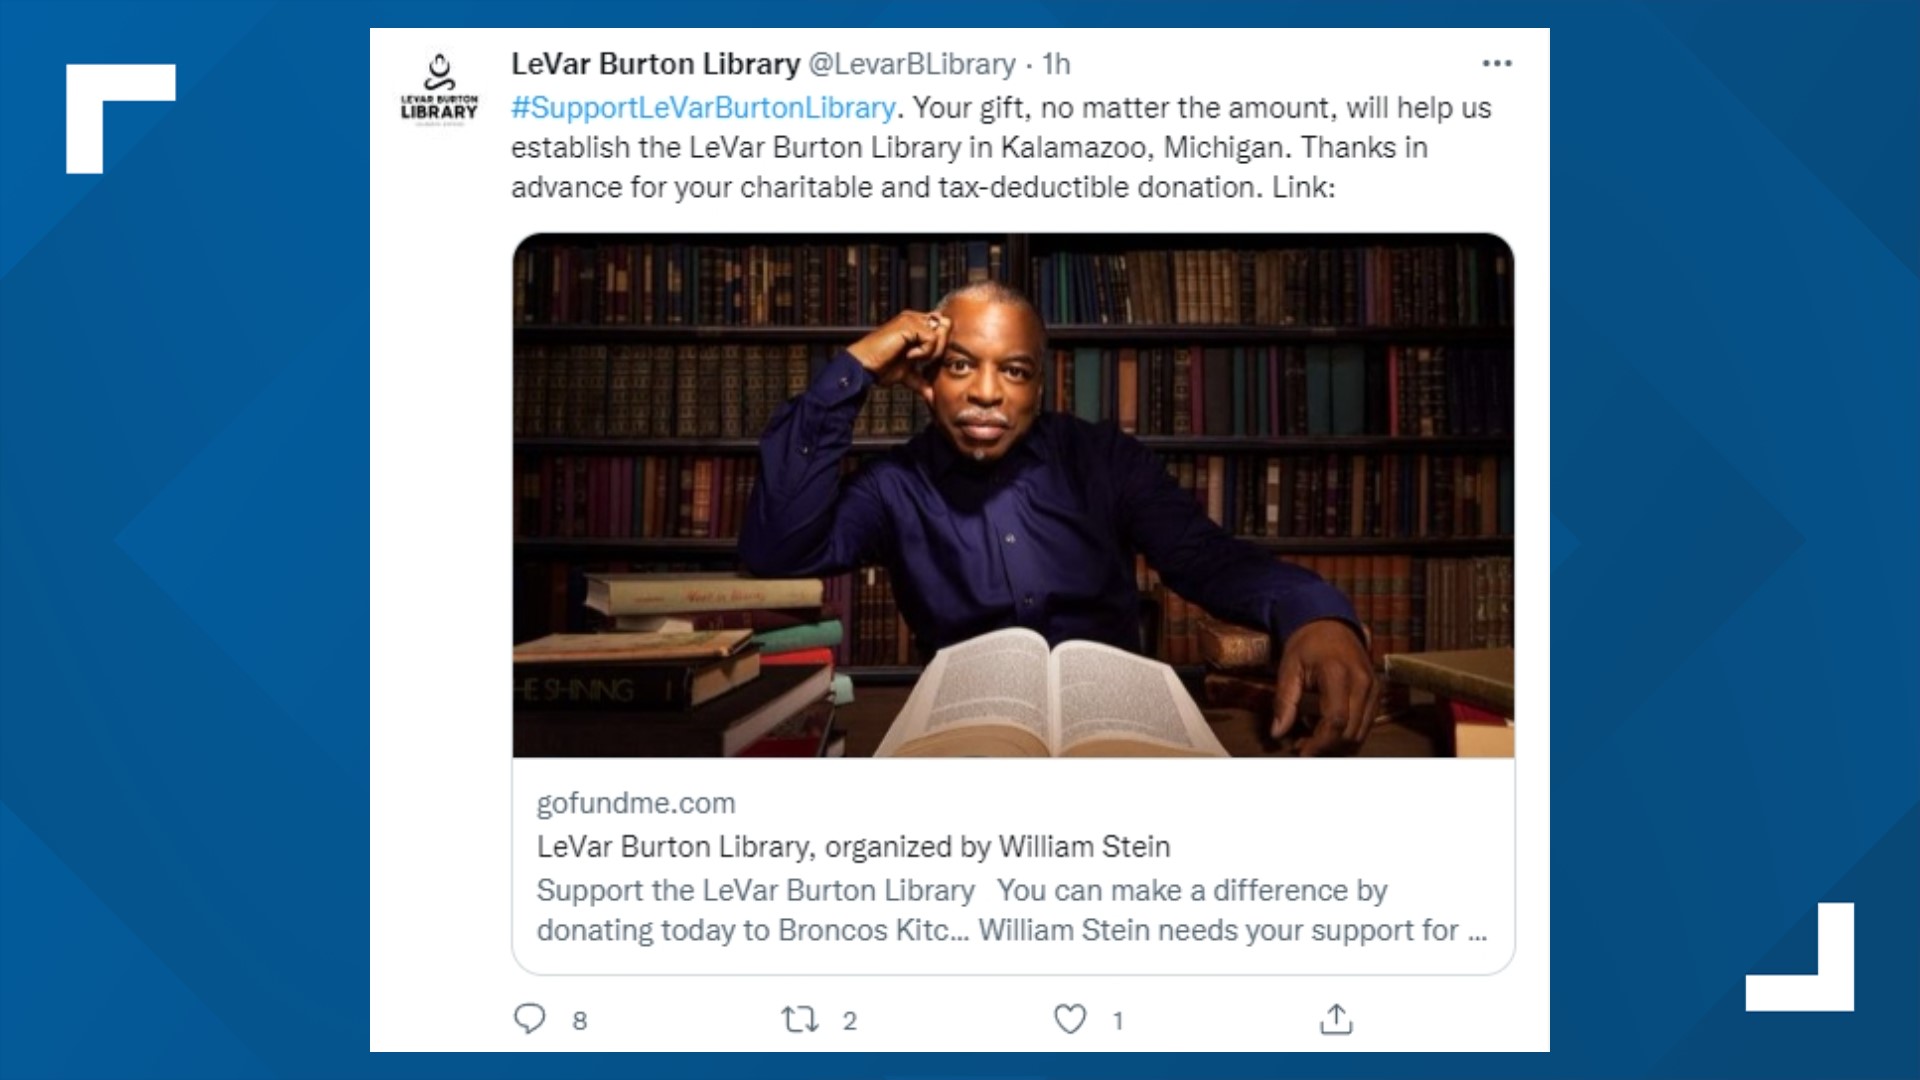 “This is not me nor is this effort affiliated with me in any way,” Burton said in a Tweet responding to the fundraiser page for a proposed Kalamazoo library.